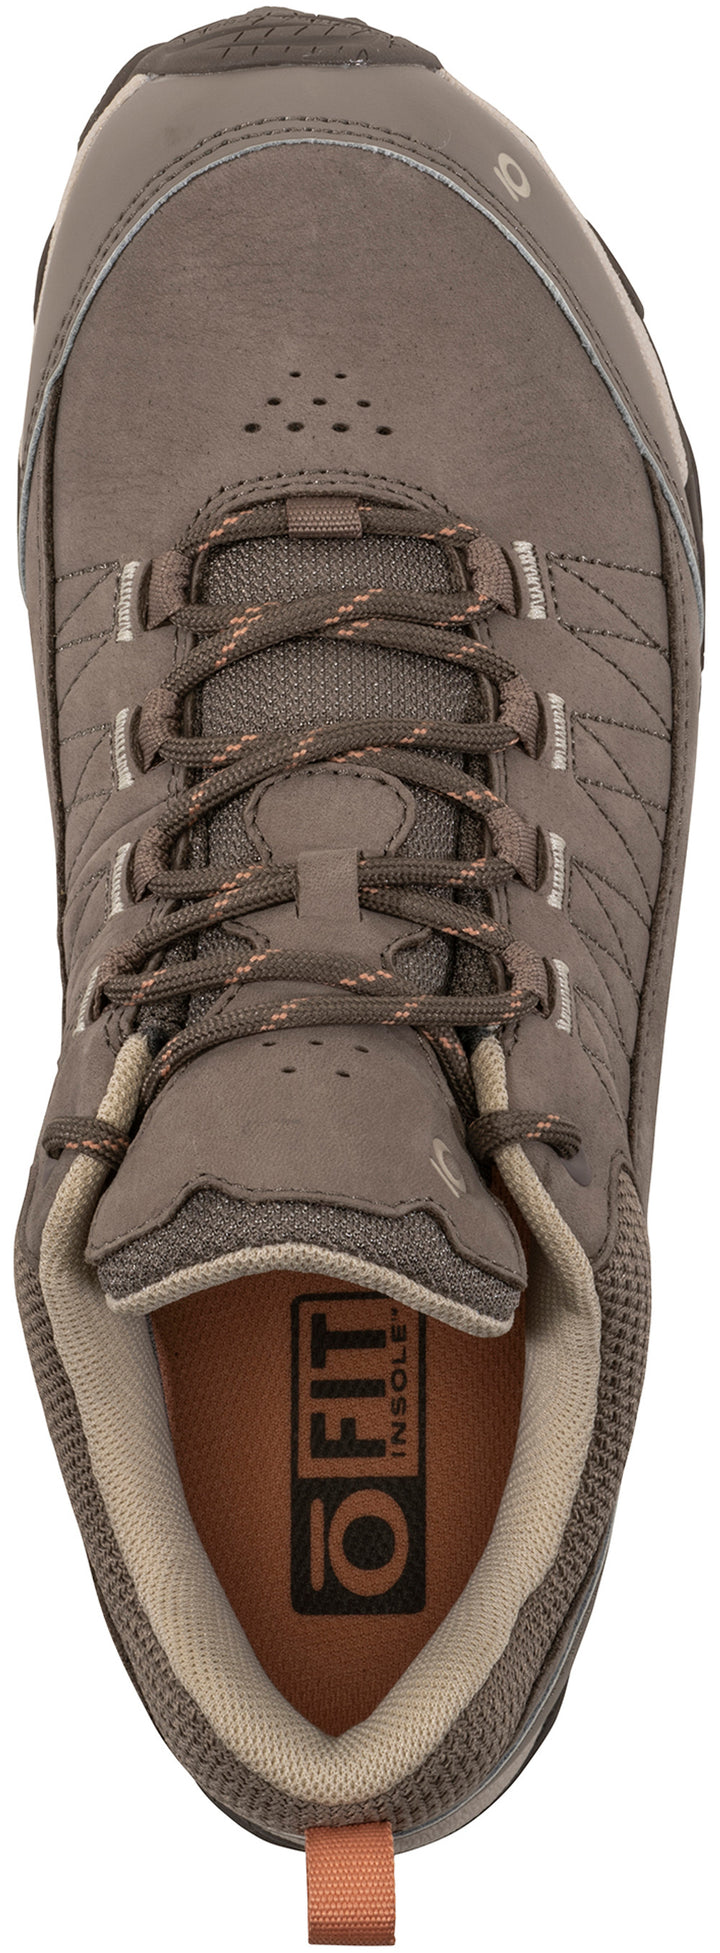 Women's Oboz Ousel Low Waterproof Color: Cinder Stone 